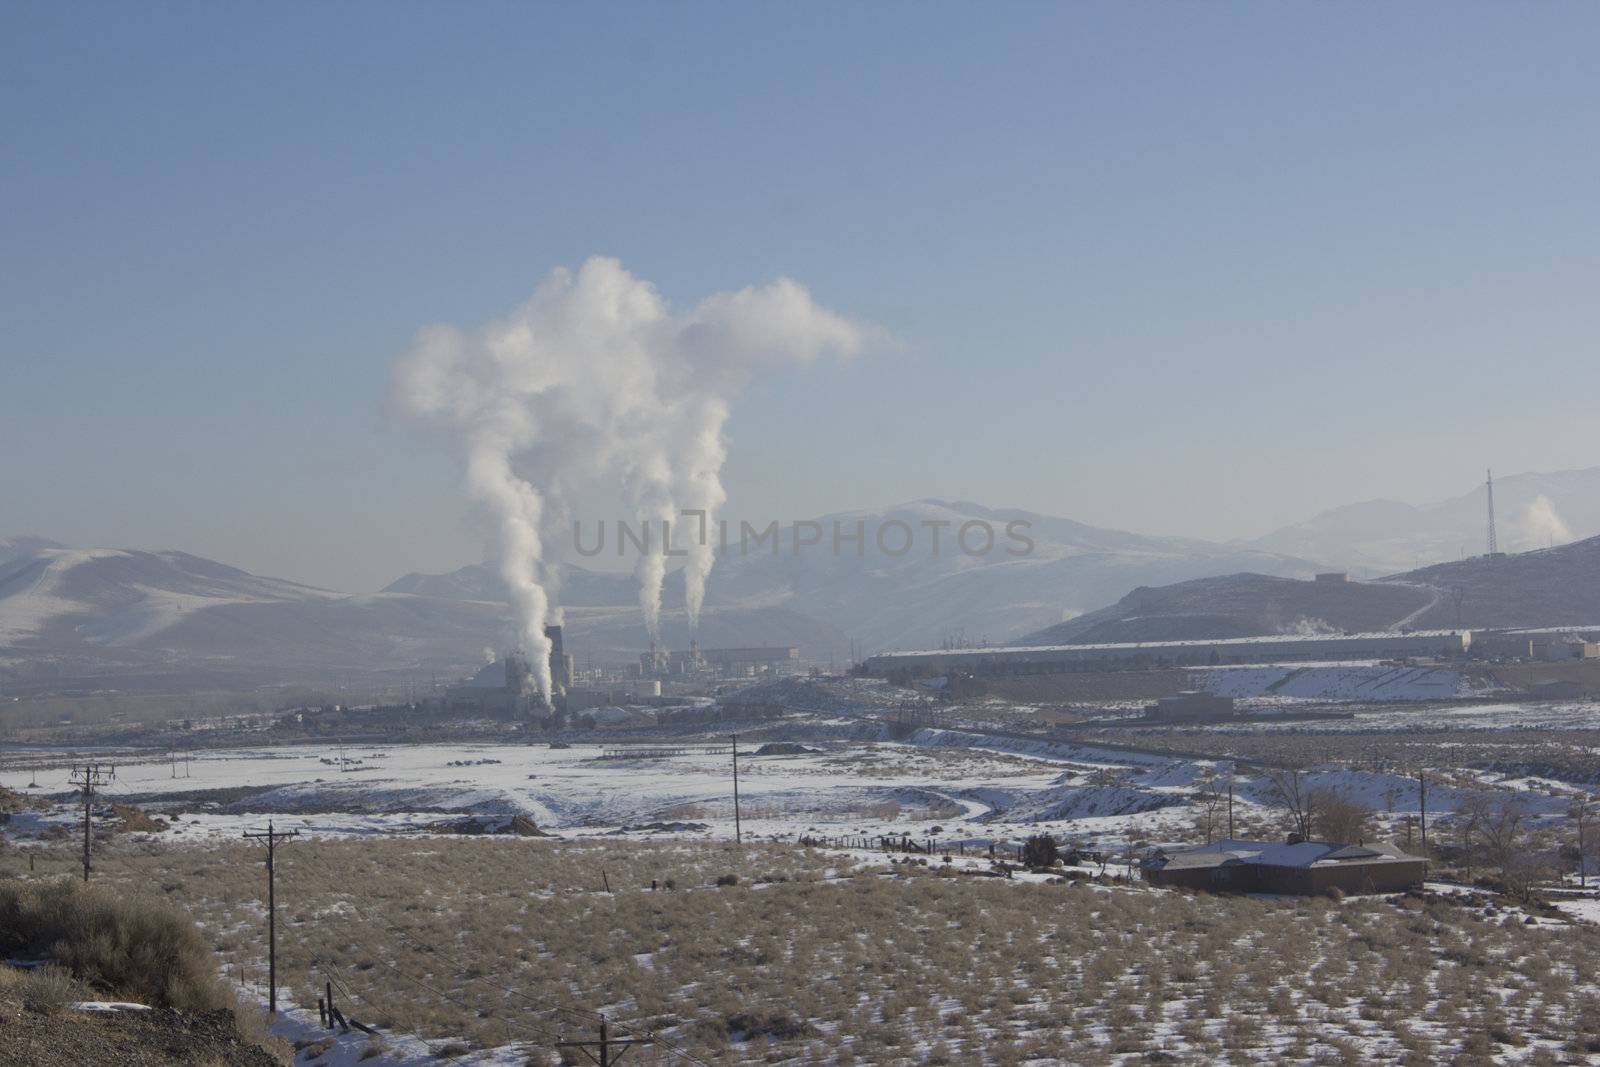 Power Plant smokestacks with blue skies and mountains